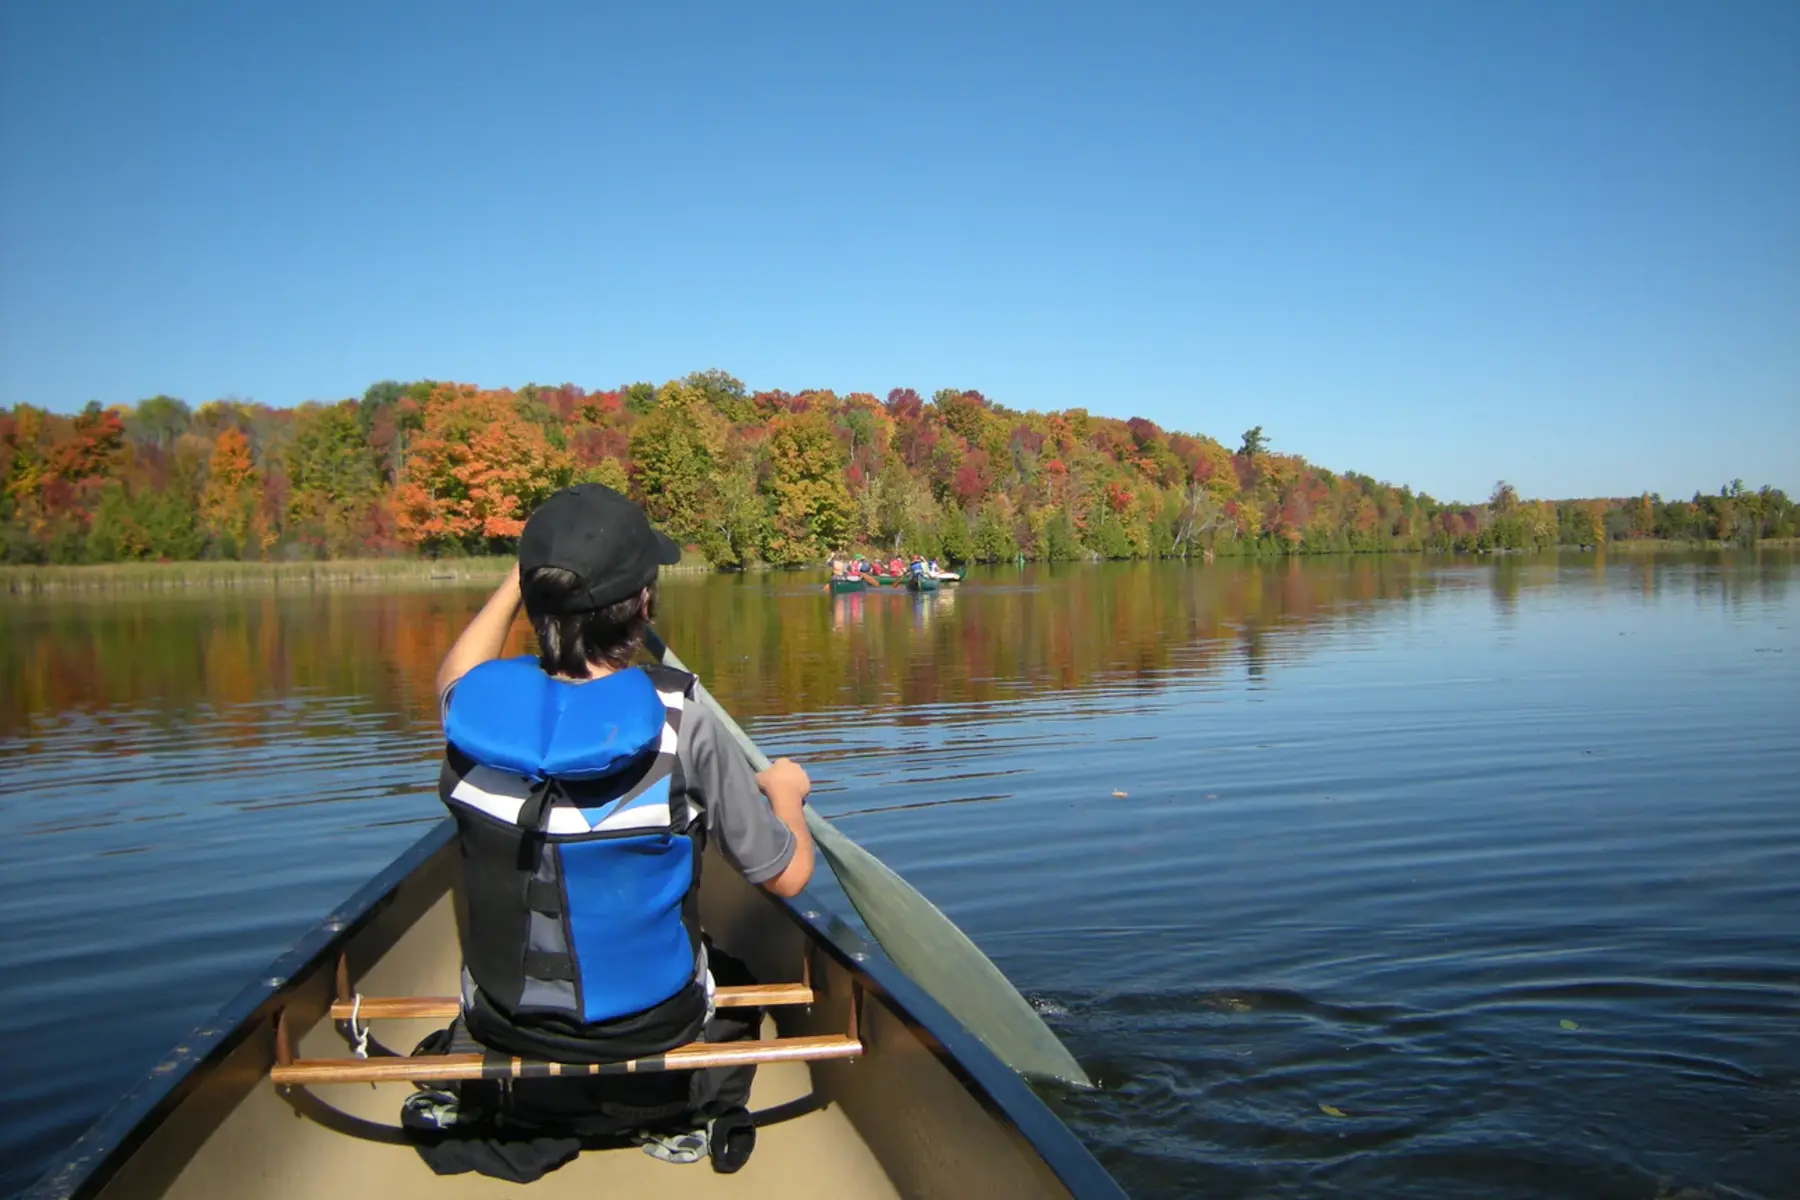 Paddler at the front of the canoe facing away from the camera paddles through a calm lake on a sunny fall day.